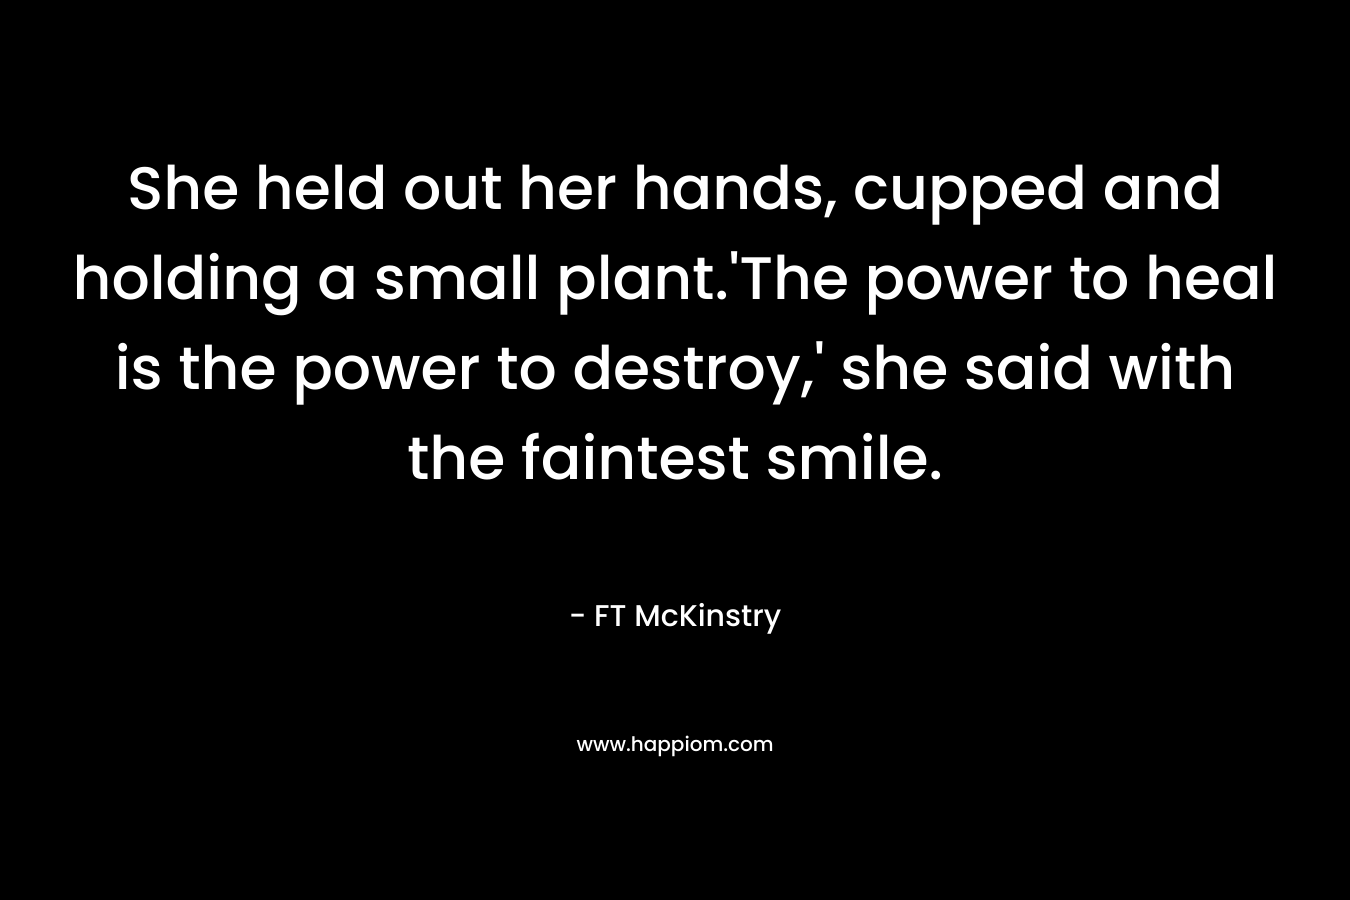 She held out her hands, cupped and holding a small plant.'The power to heal is the power to destroy,' she said with the faintest smile.